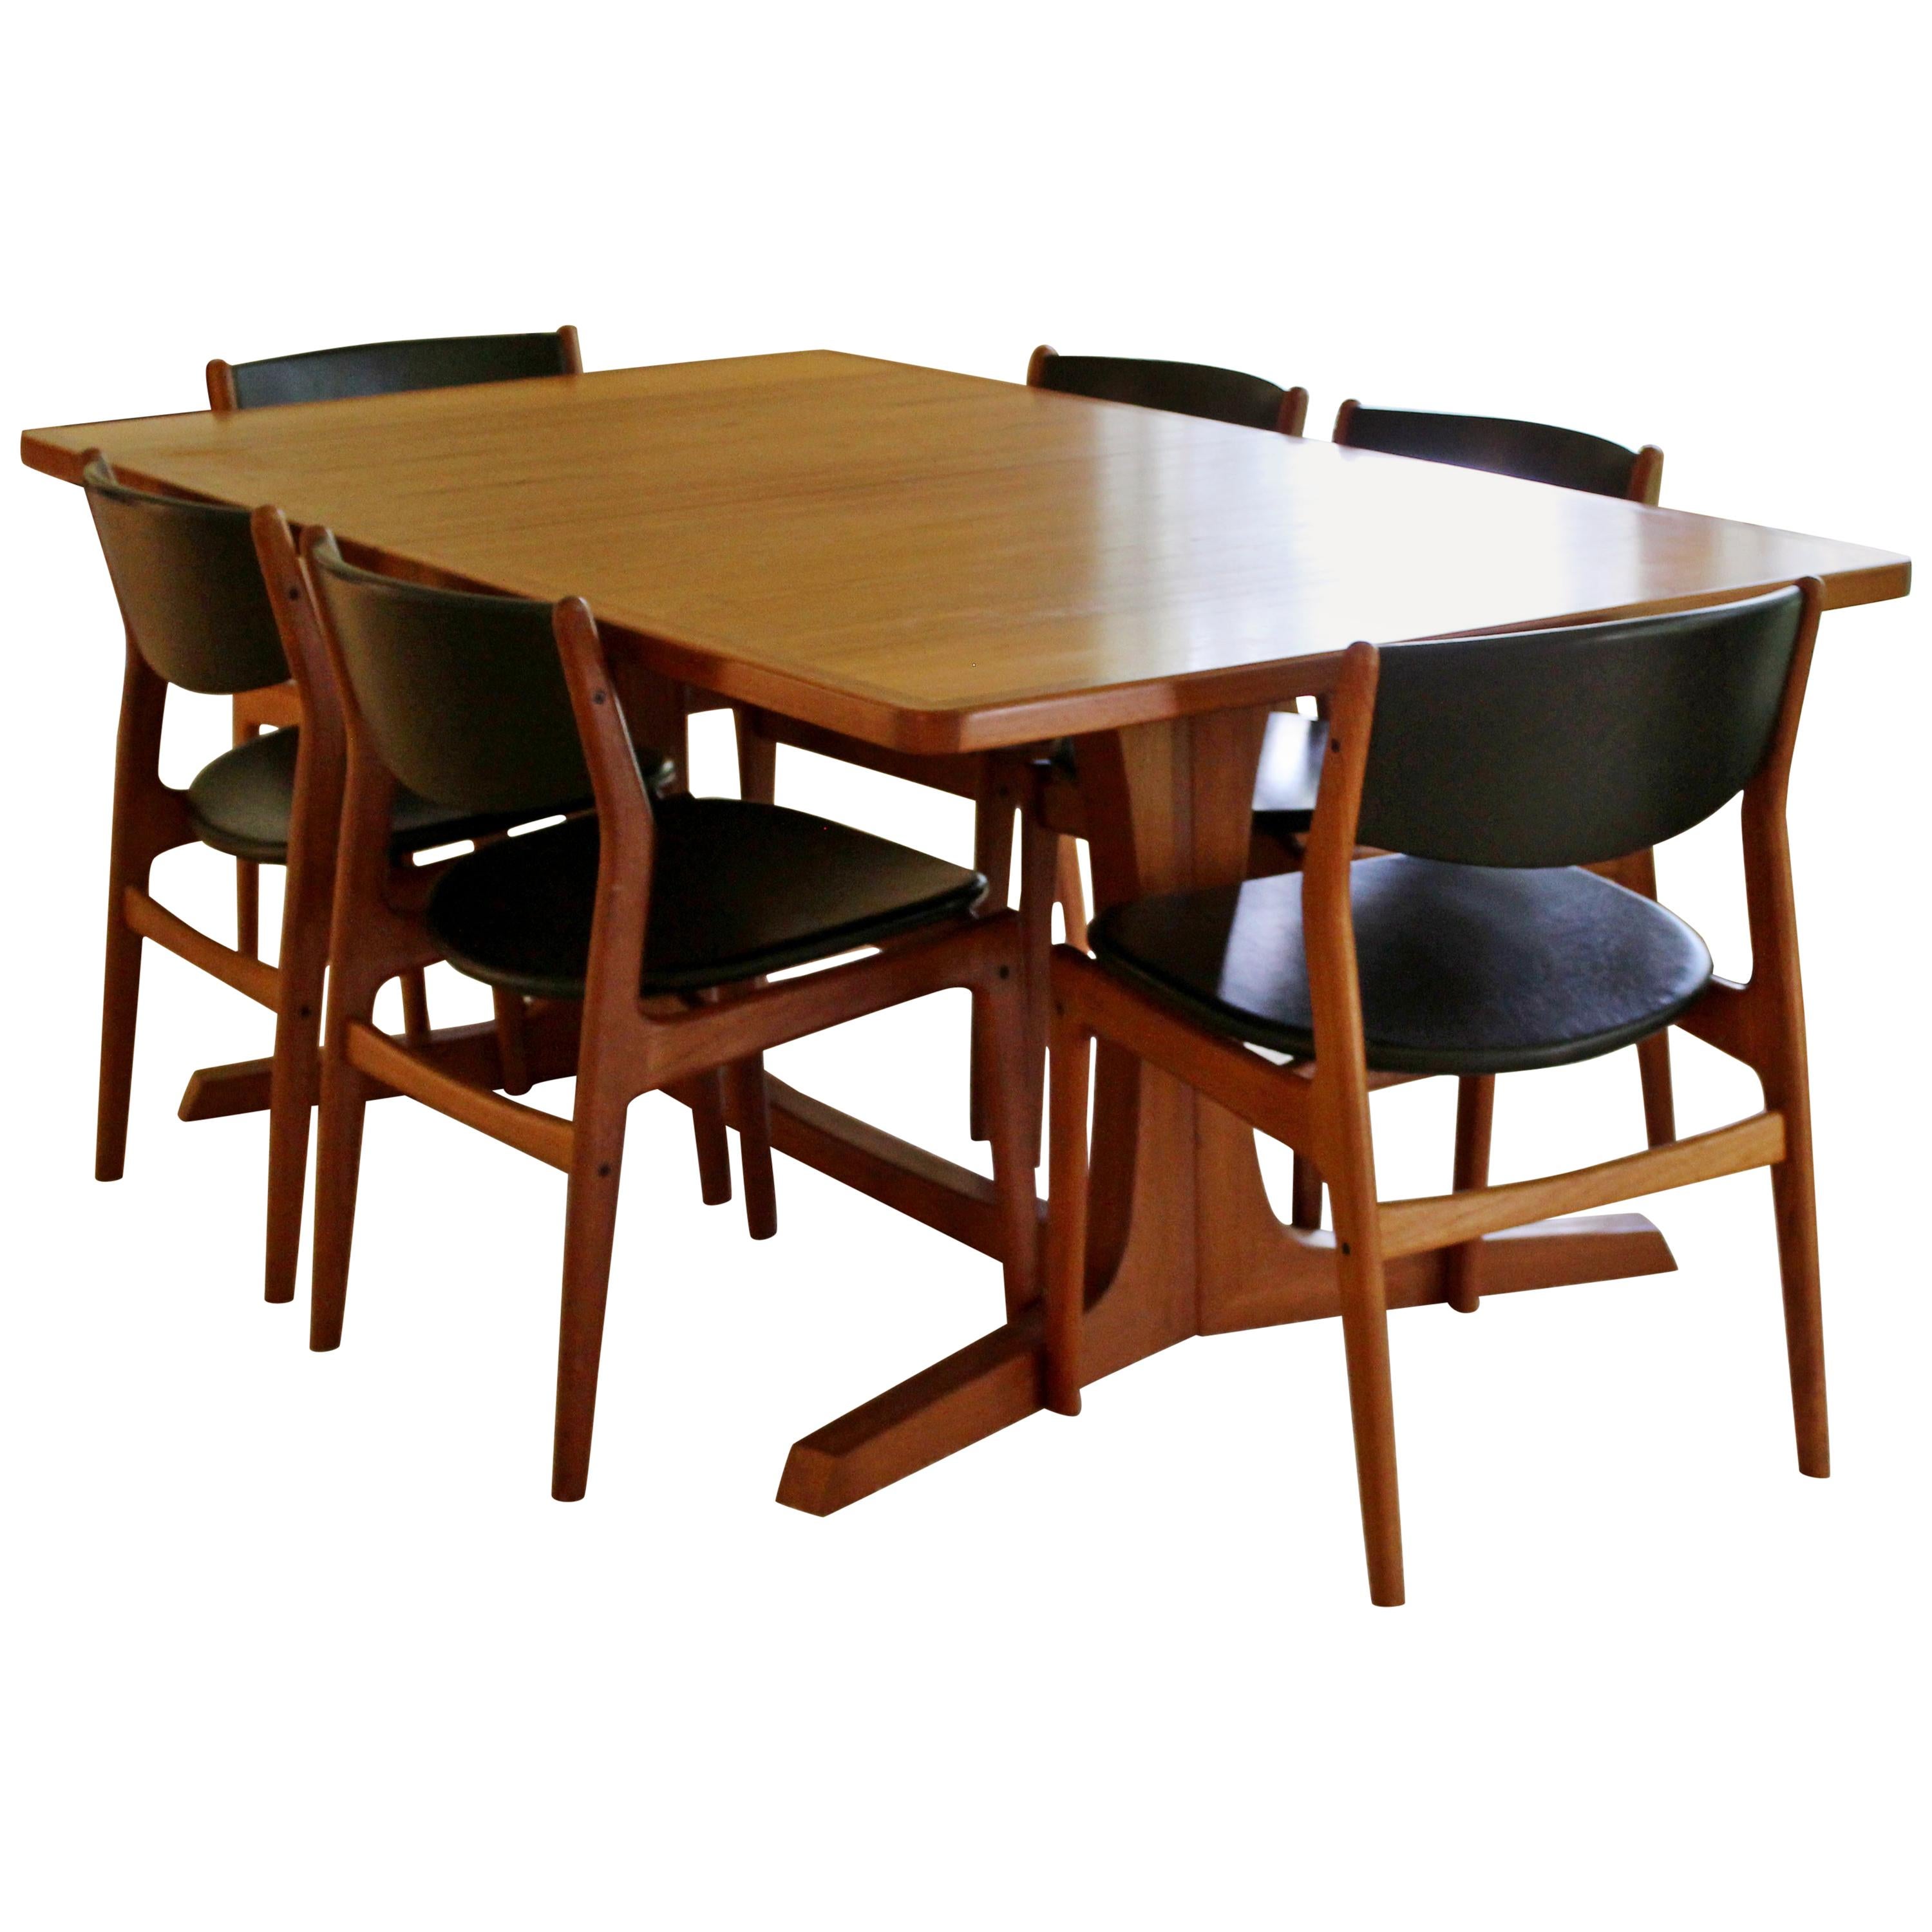 Mid-Century Modern Teak Expandable Dining Set Table, 2 Leaves, 6 Chairs Danish